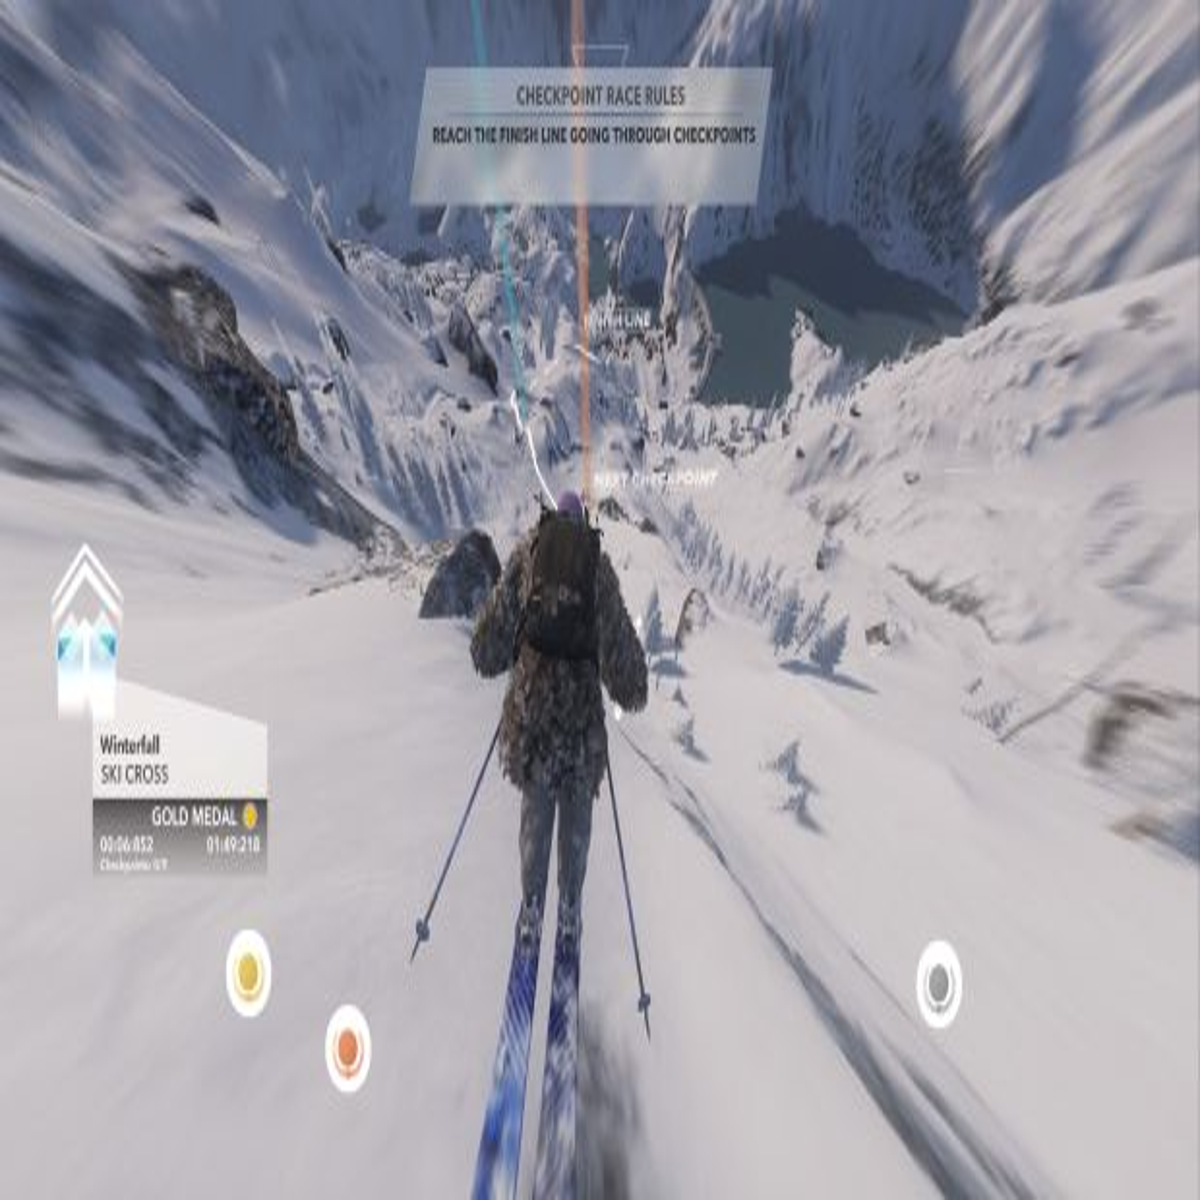 The best lines in Ubisoft's game Steep